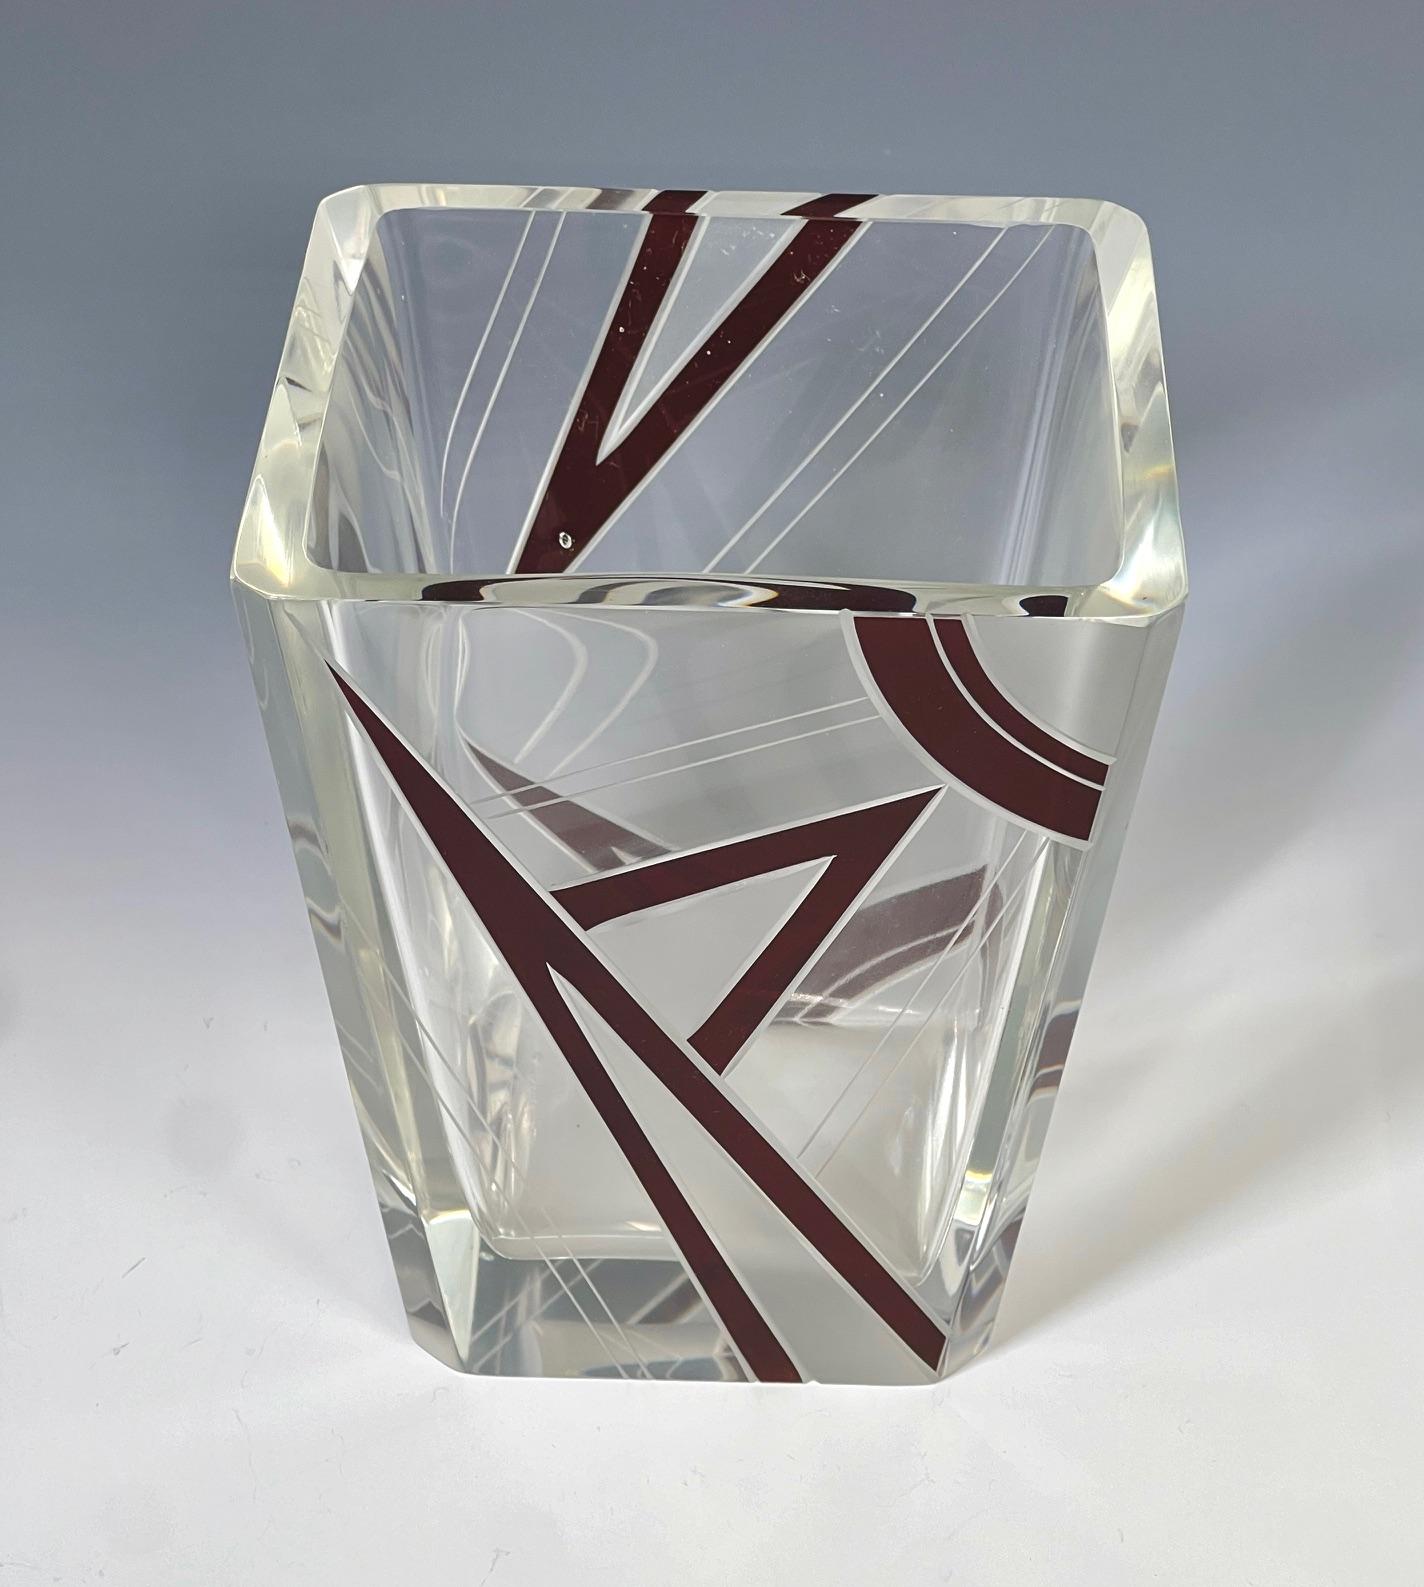 Please see the other options listed to see the variety available of Art Deco vases, in rare and interesting forms, patterns and colors. Used singly or in groupings, these make a bold and dramatic statement. Designed by Karl Palda, these were popular